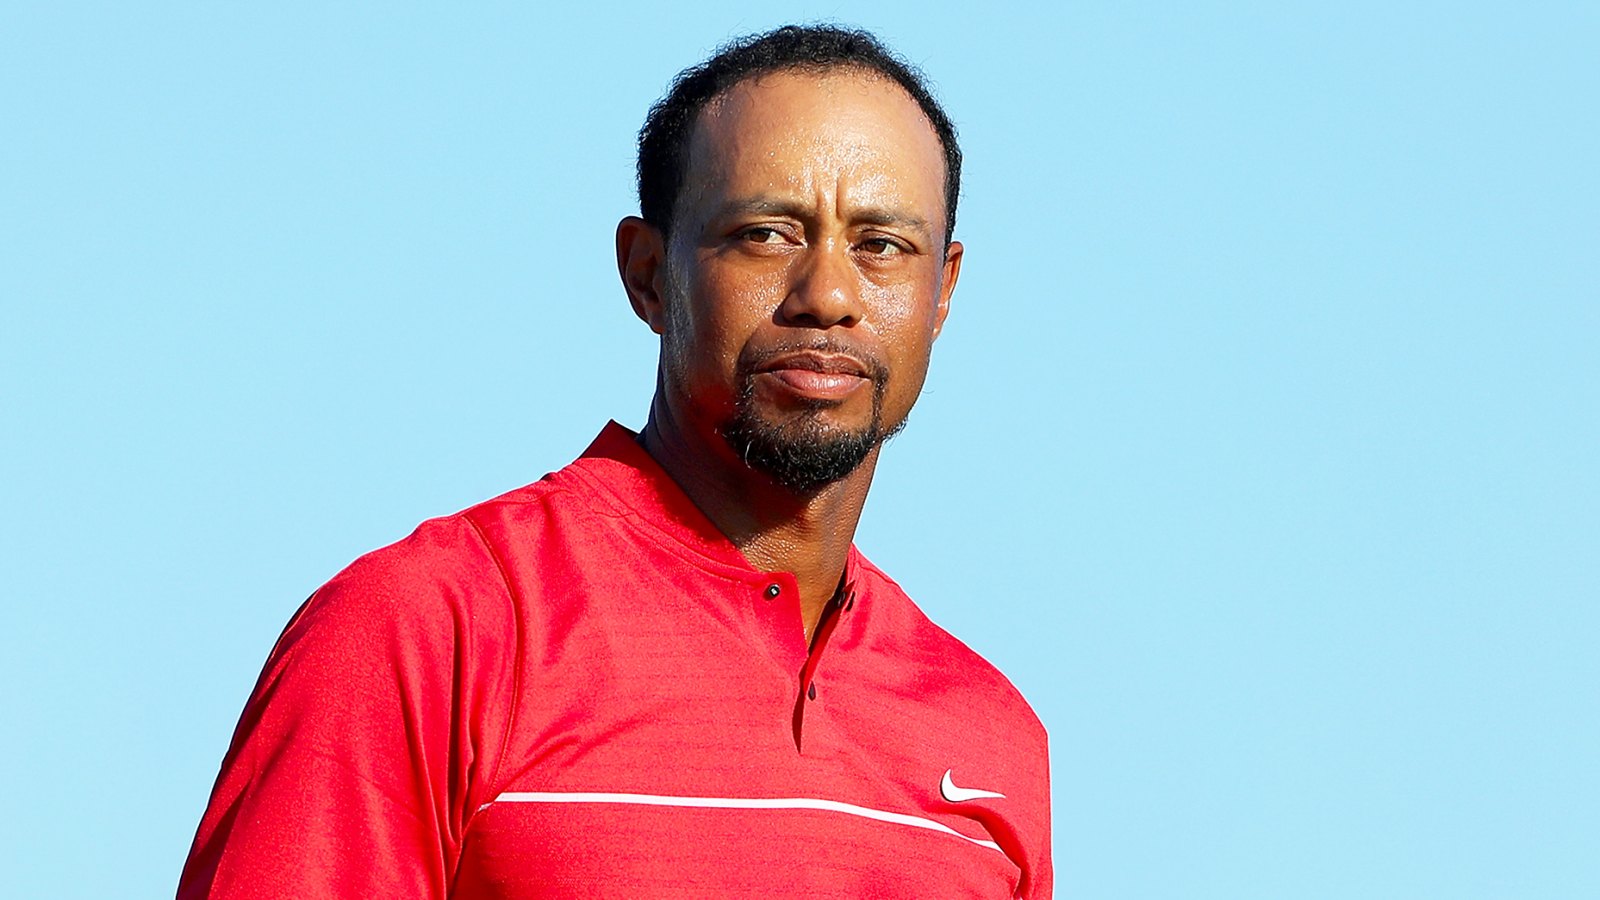 Tiger Woods during the final round of the Hero World Challenge in Nassau, Bahamas.